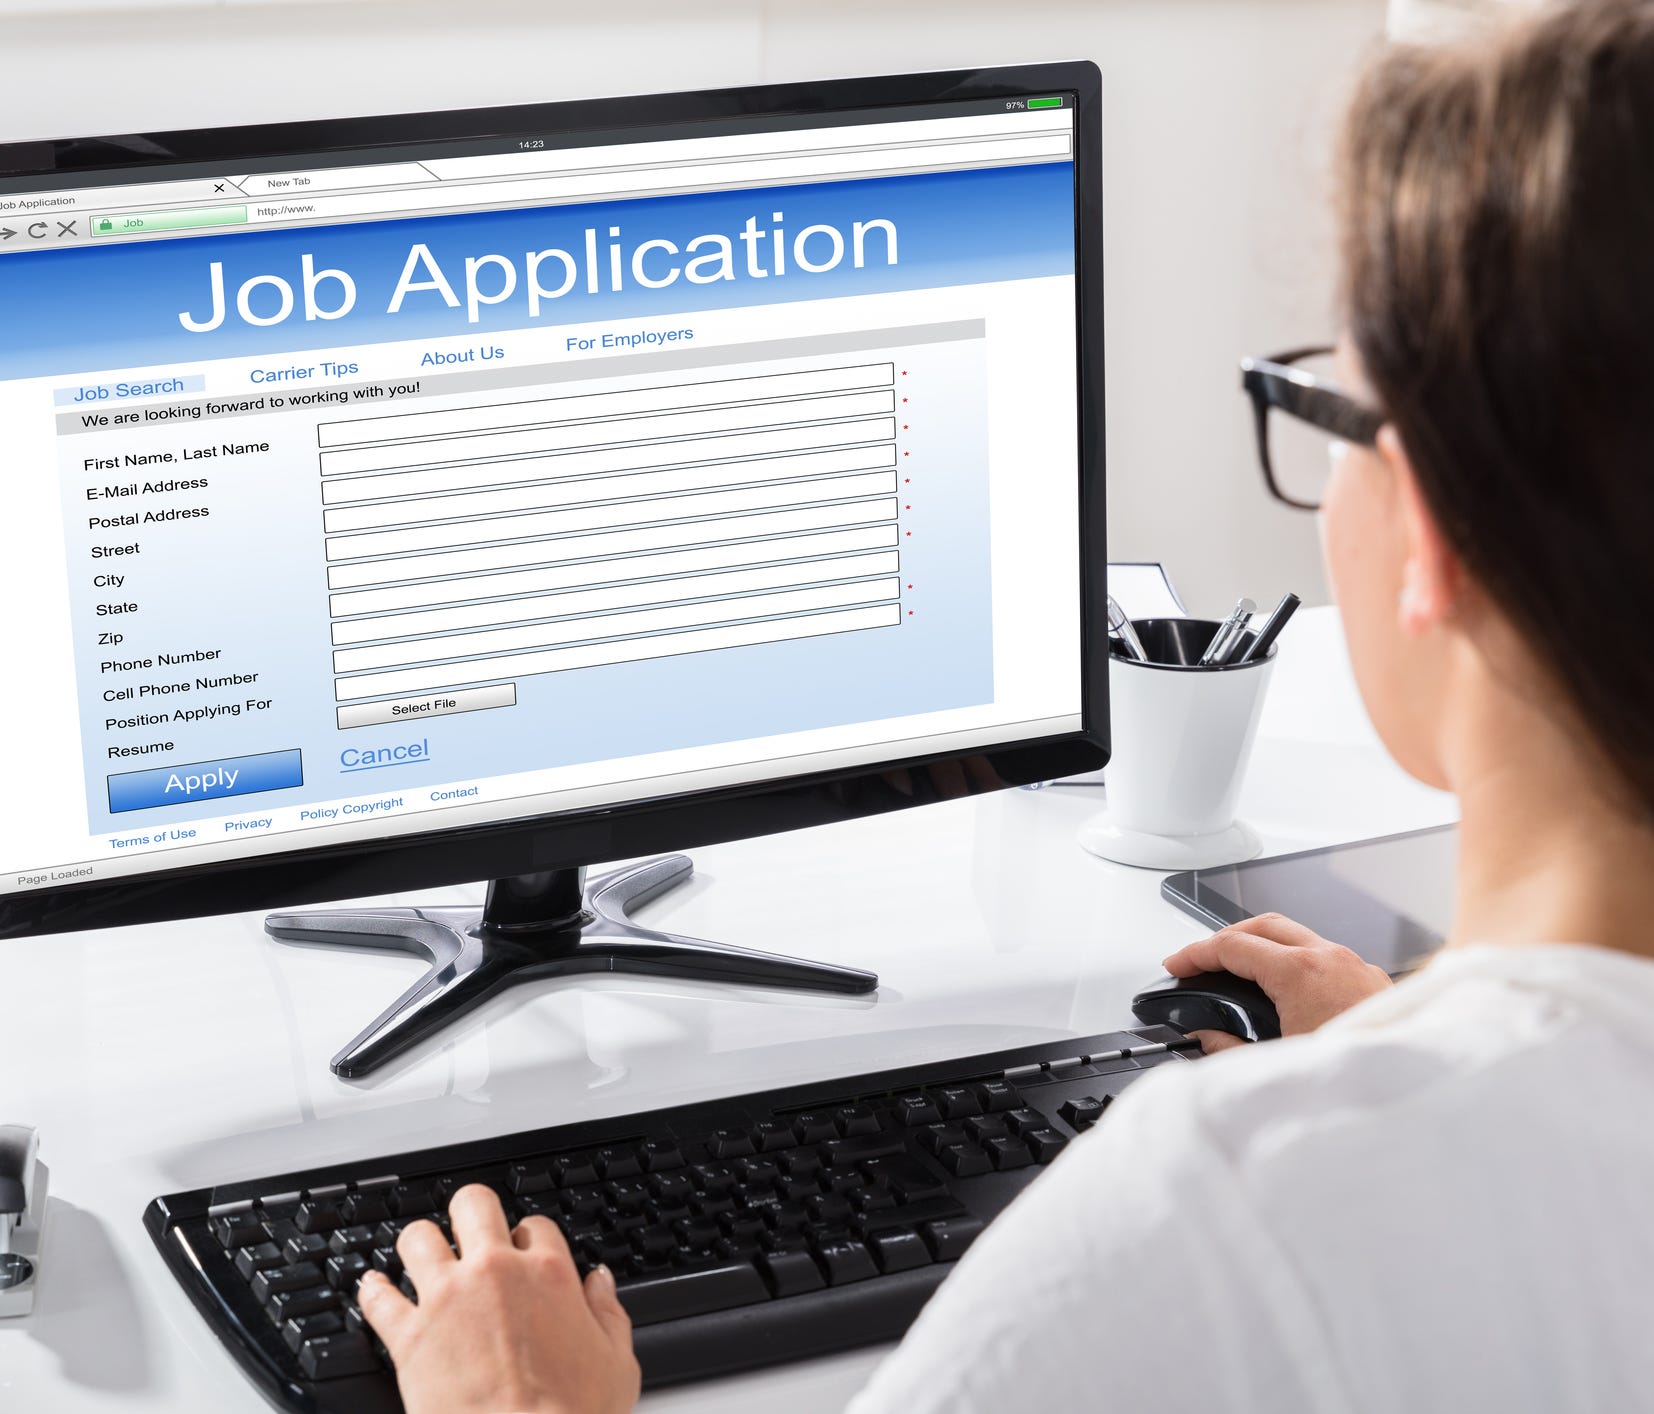 Many companies have turned to application tracking systems to help ease the hiring process. Why should you care? Conventional advice on résumé writing doesn't tend to take this into account.